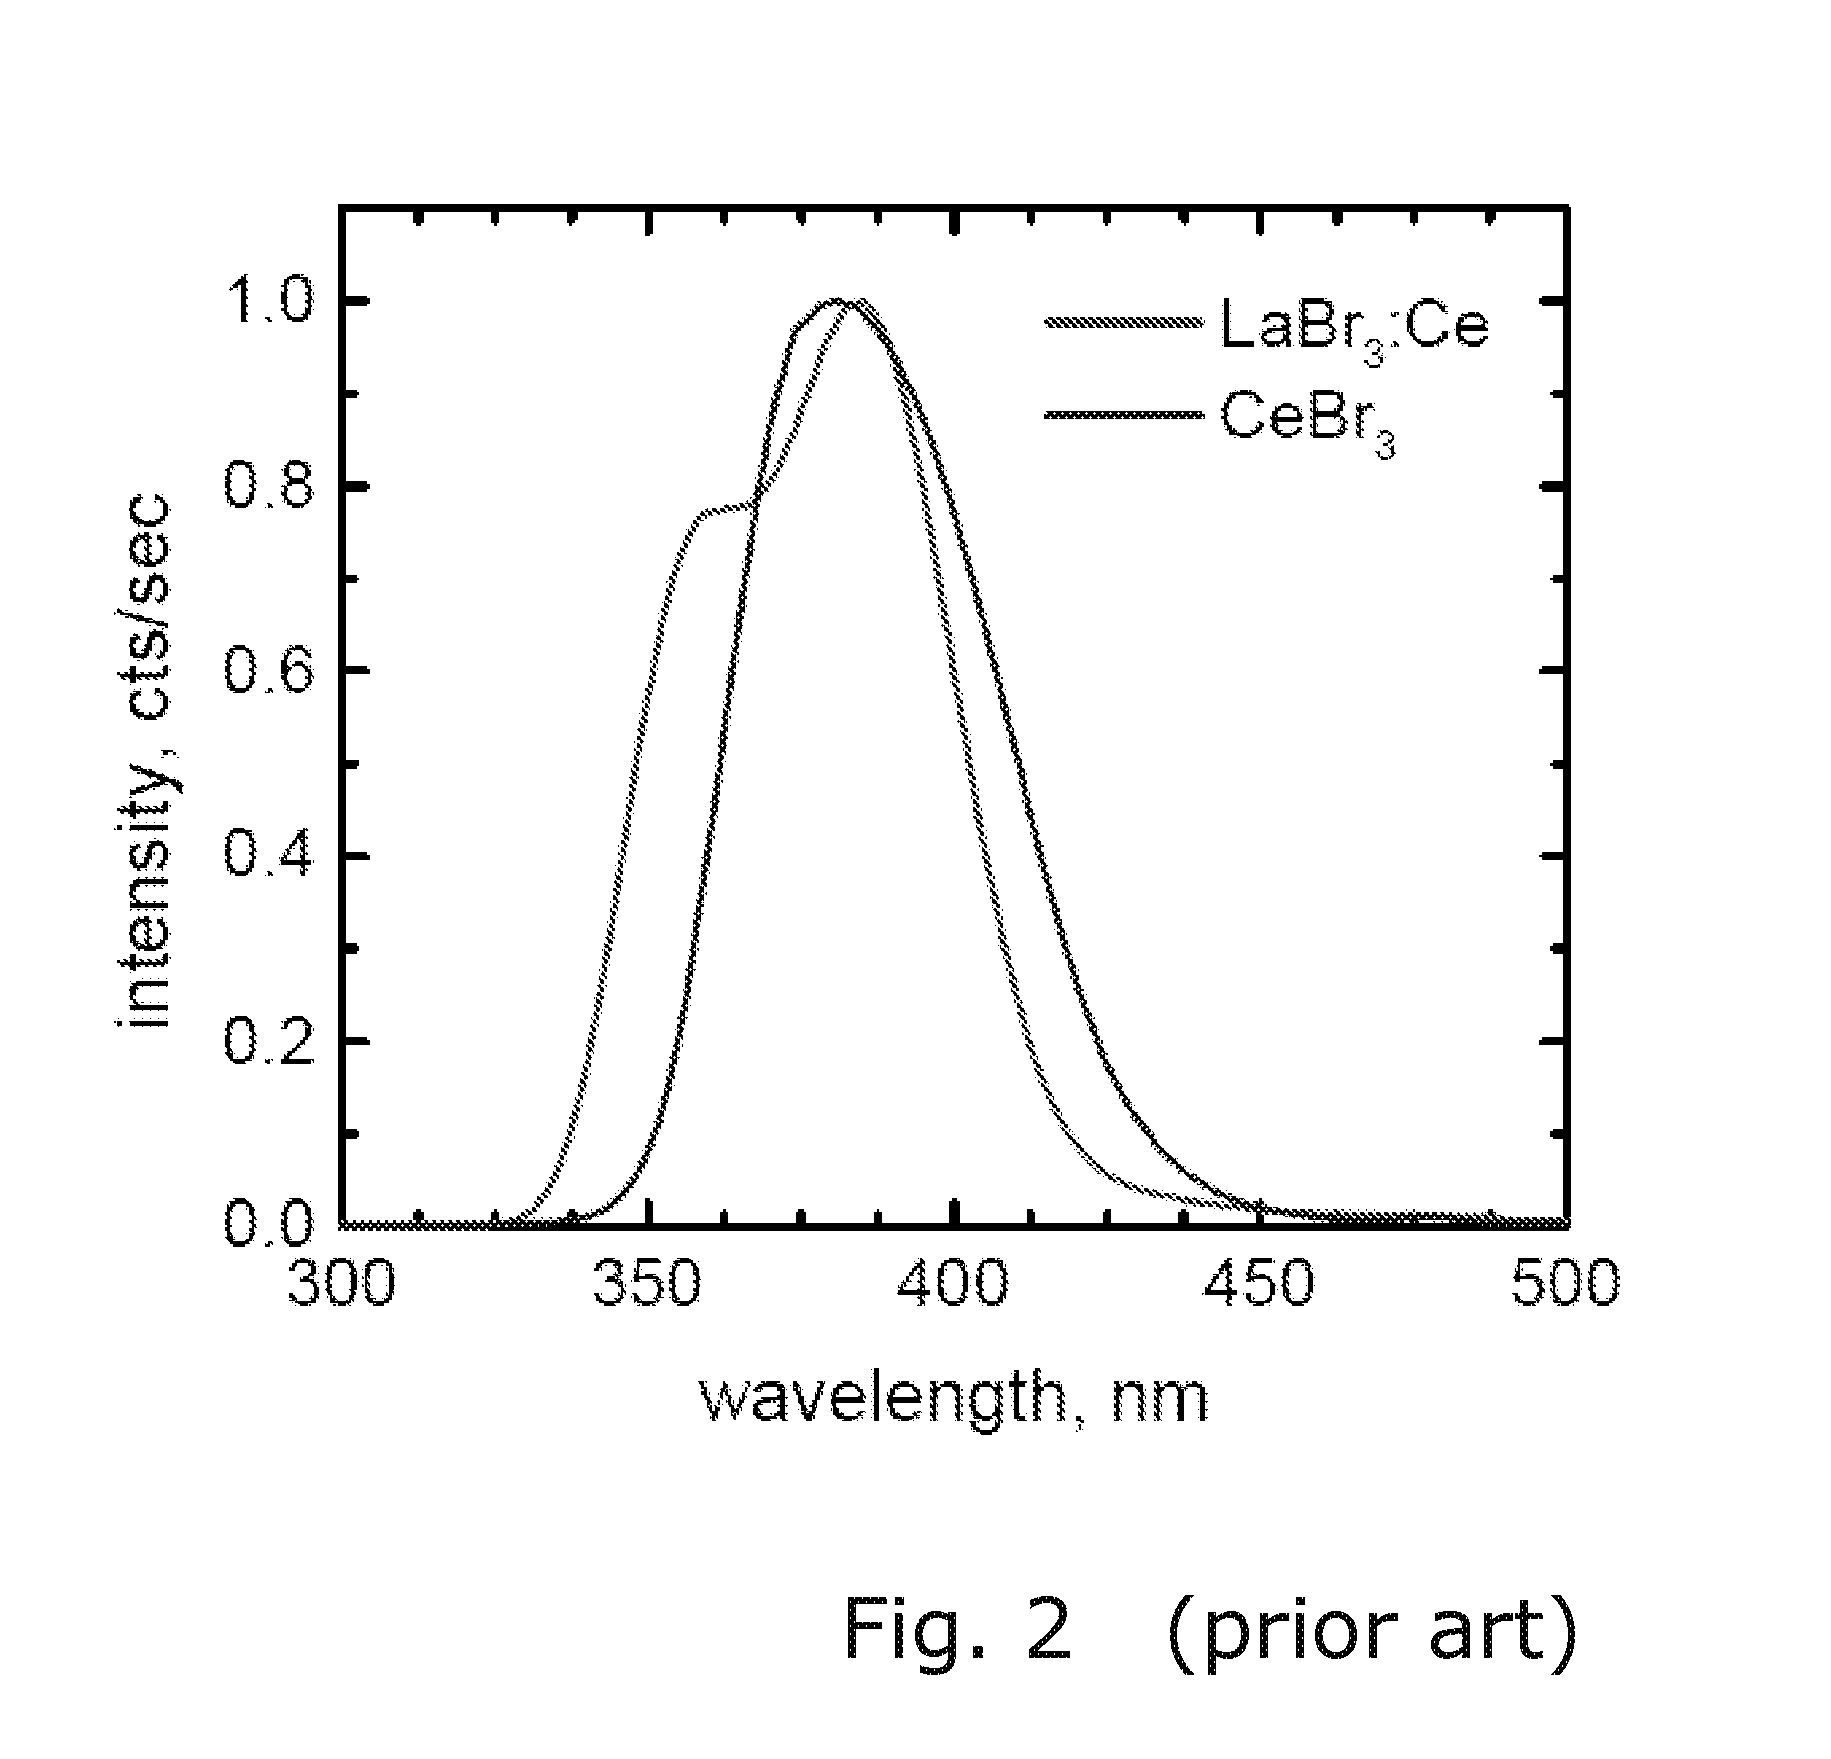 Method, Apparatus, Material, and System of Using a High Gain Avalanche Photodetector Transistor